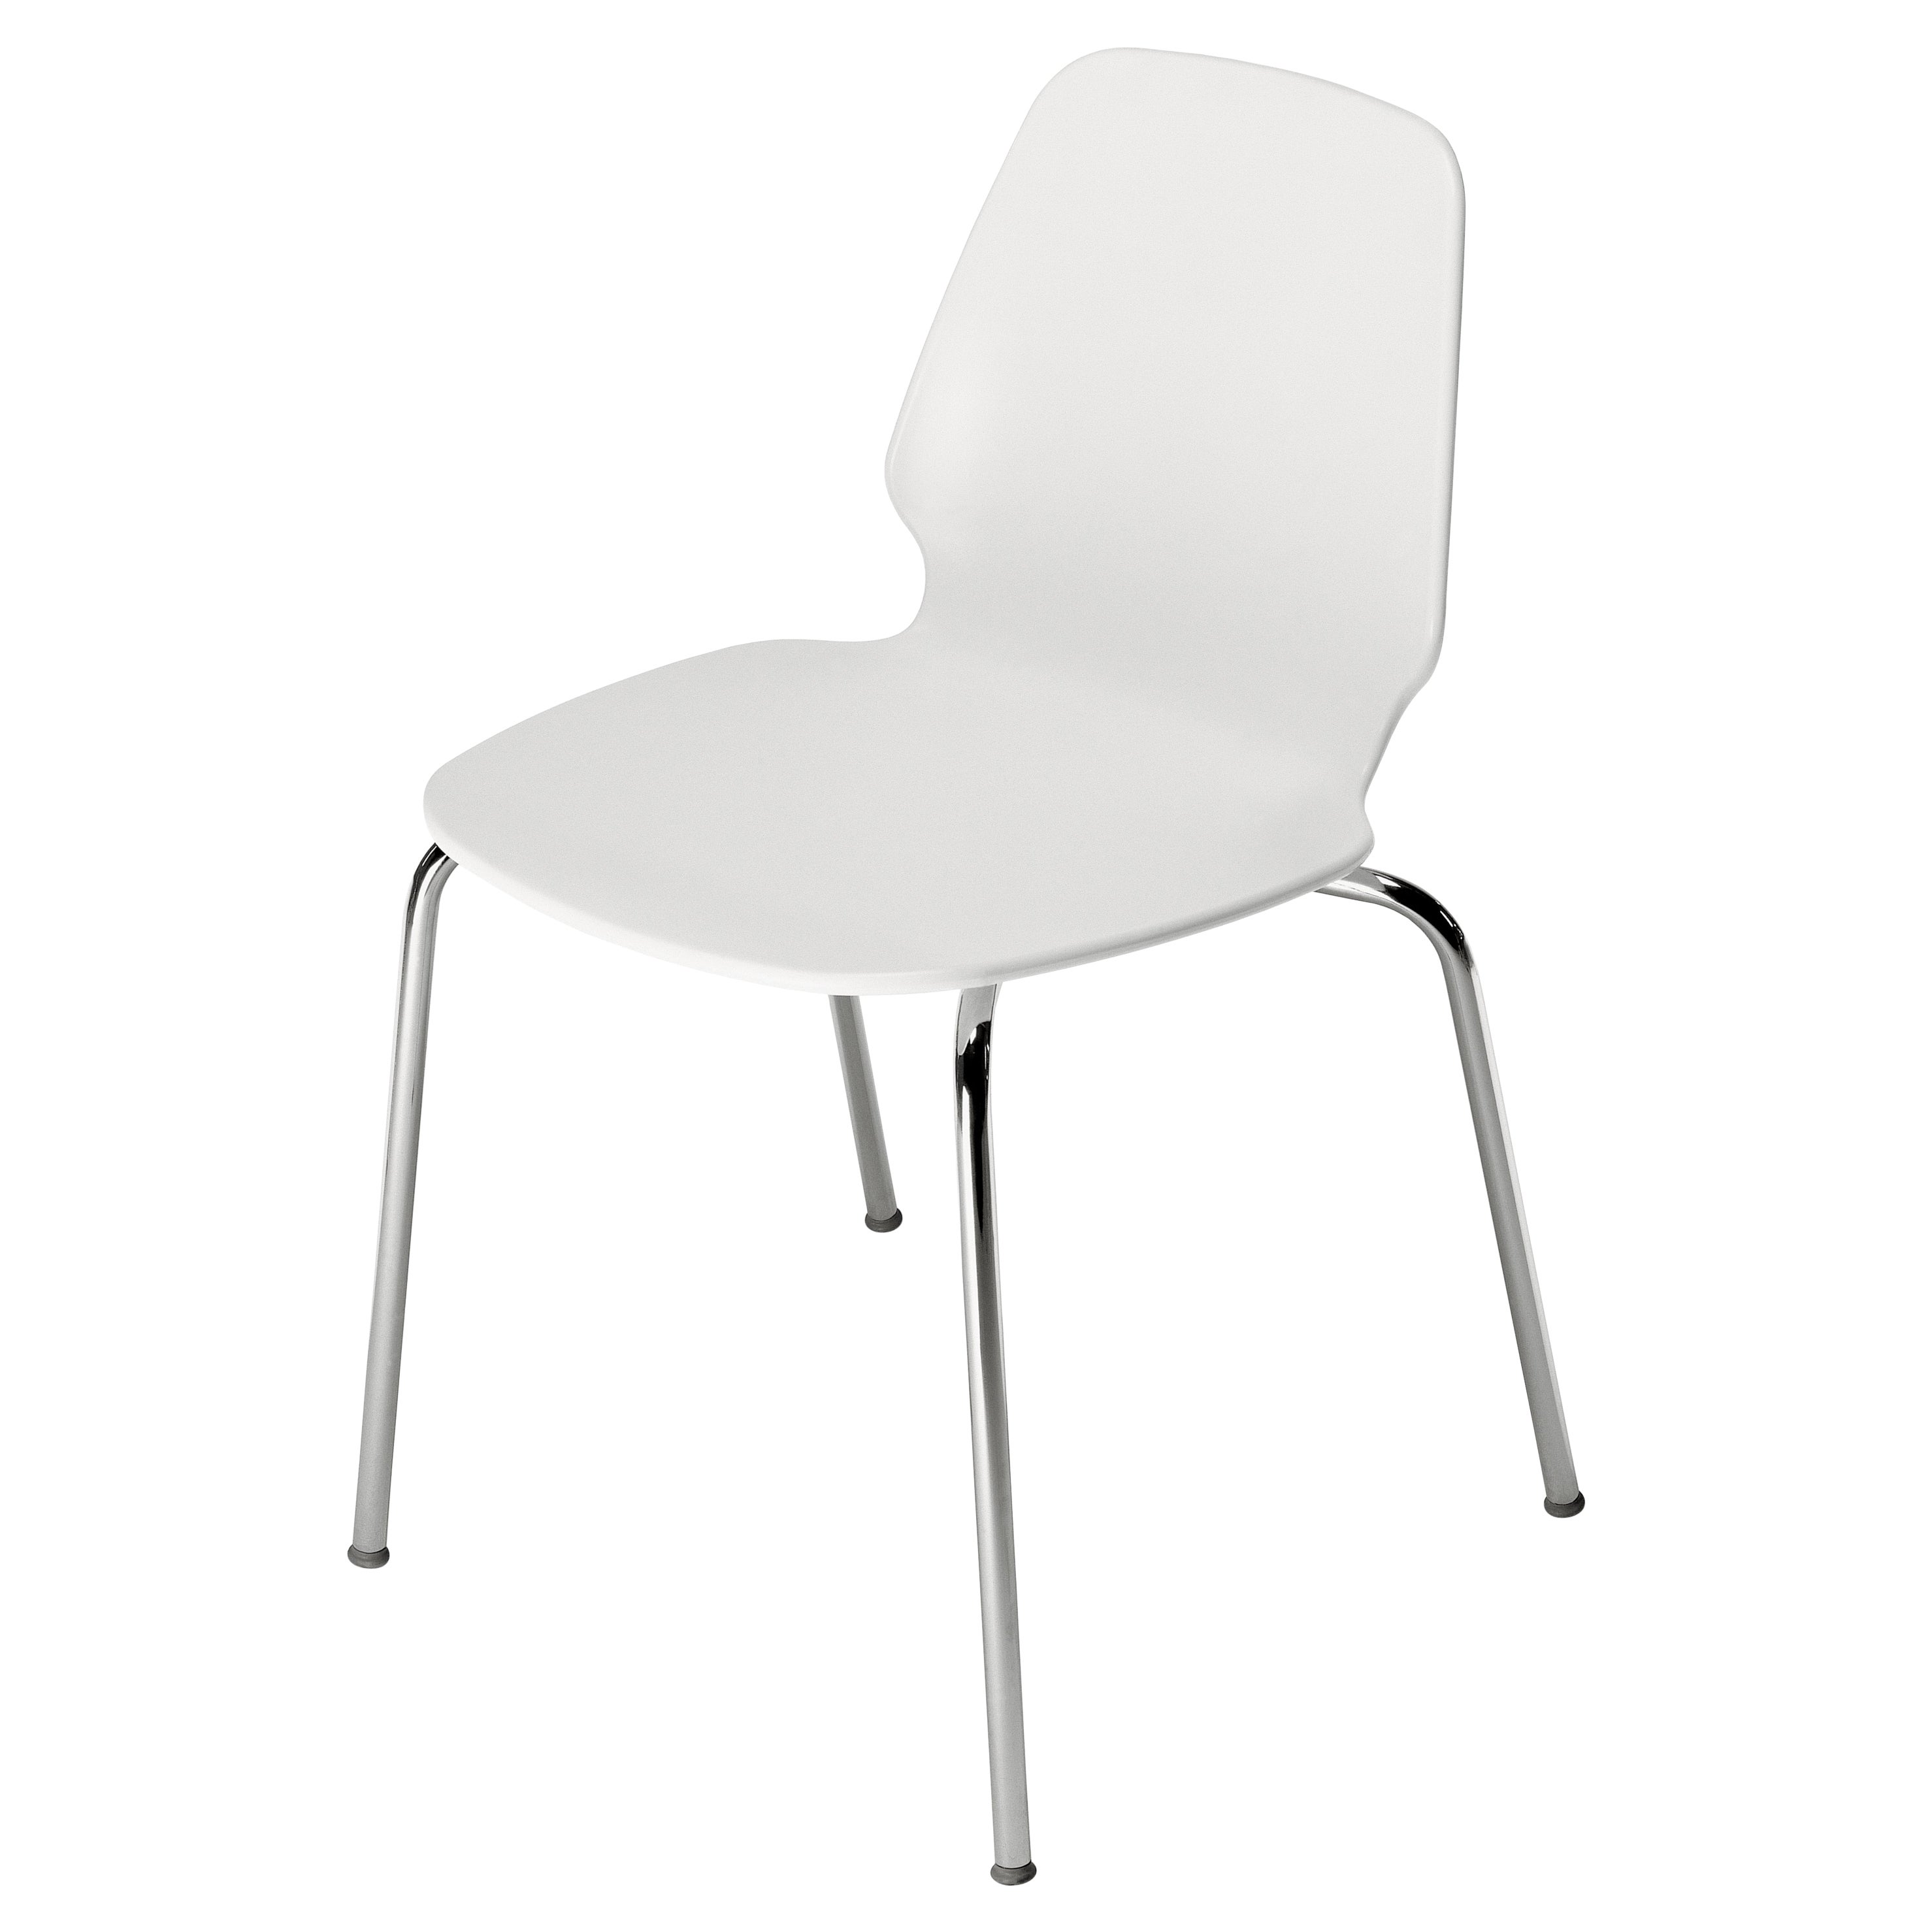 Alias 530 Selinunte Chair in White and Chromed Steel Frame by Alfredo Häberli